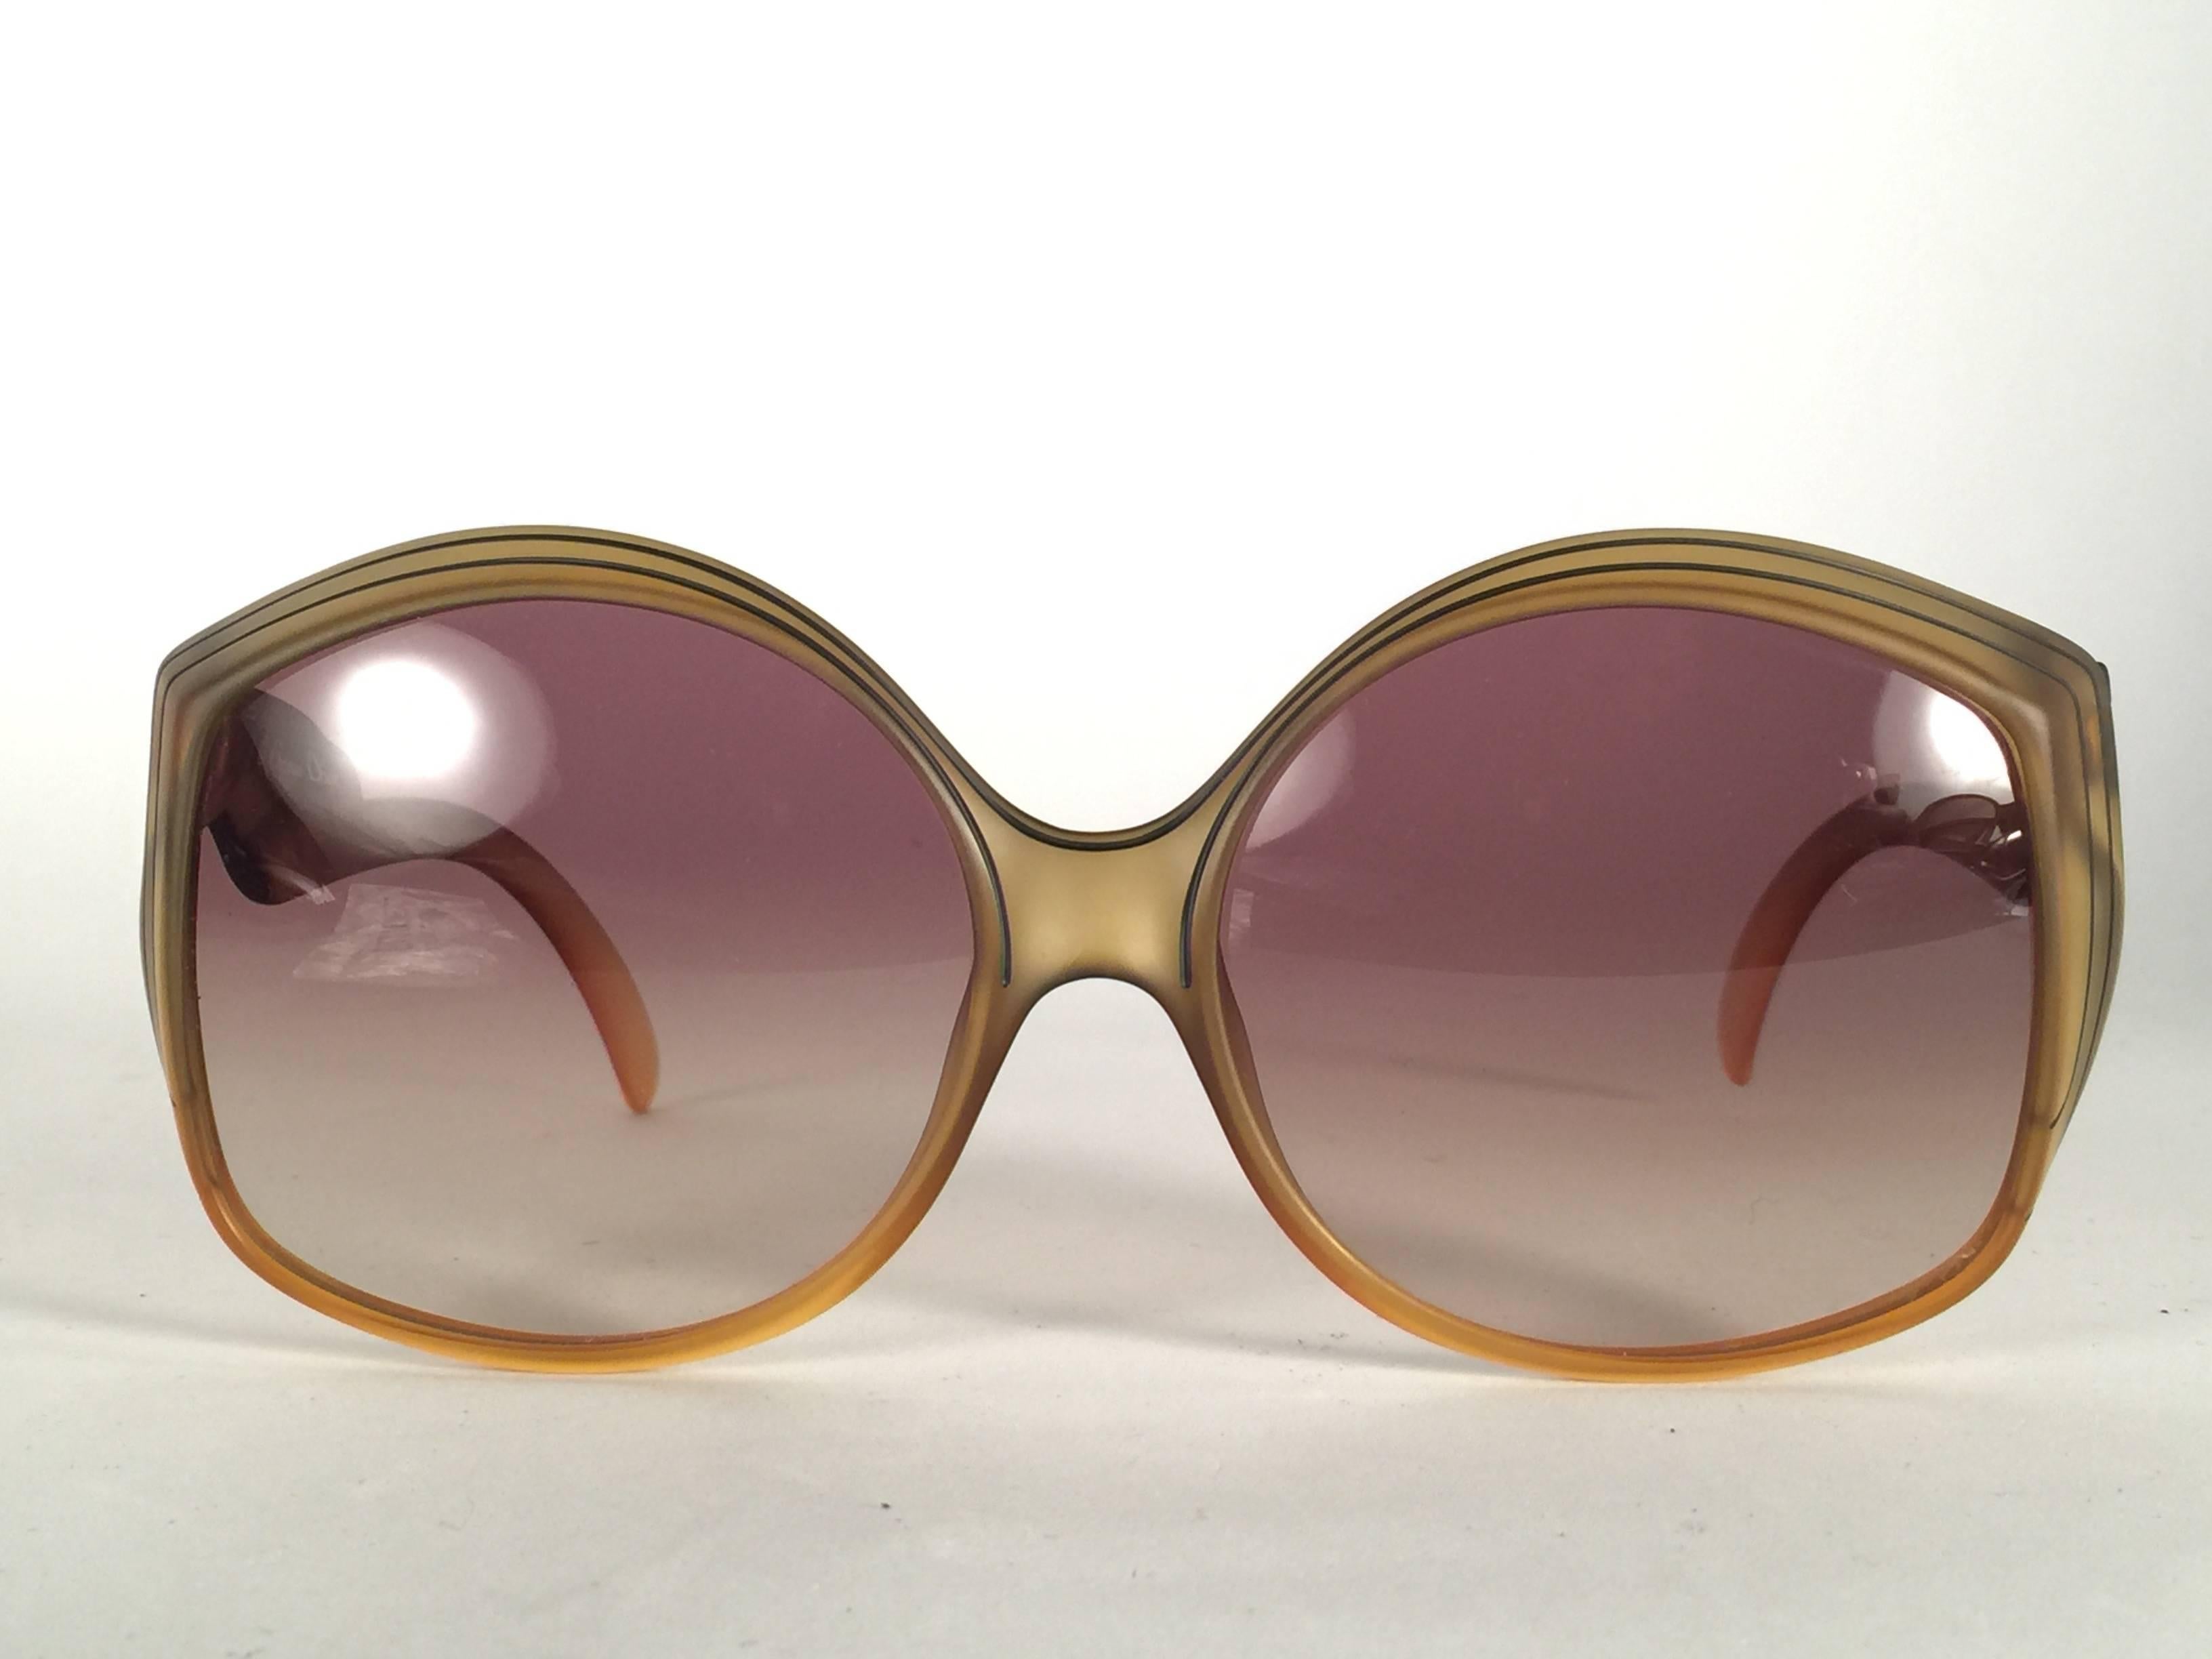 New Vintage Christian Dior 2041 10 Green matte with accents frame with spotless light  gradient lenses. 

Made in Austria.
 
Produced and design in 1970's.

New, never worn or displayed. Comes with its original silver Christian Dior Lunettes sleeve.
